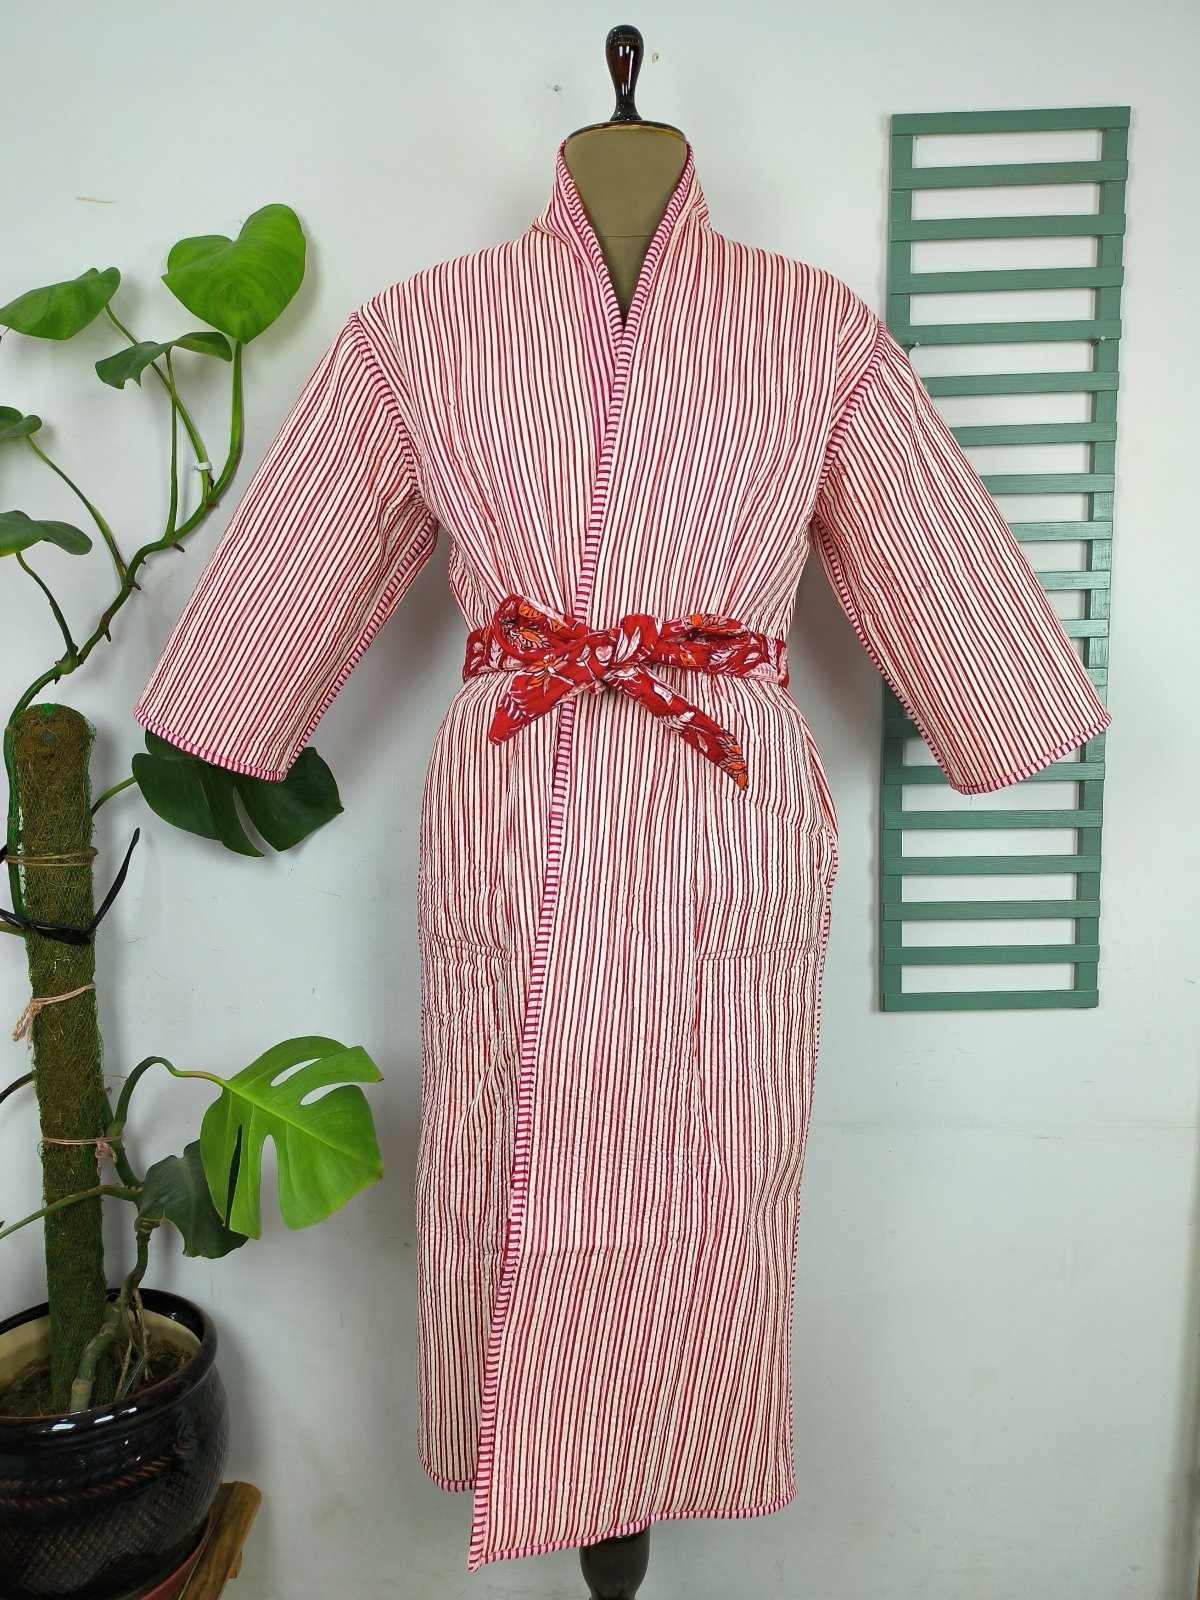 Reversible Pure Cotton Kantha Quilted Unisex Red Floral Kimono | Perfect Dressing Fall Autumn Winter Boho Indian Block Printed Stripes Robe - The Eastern Loom